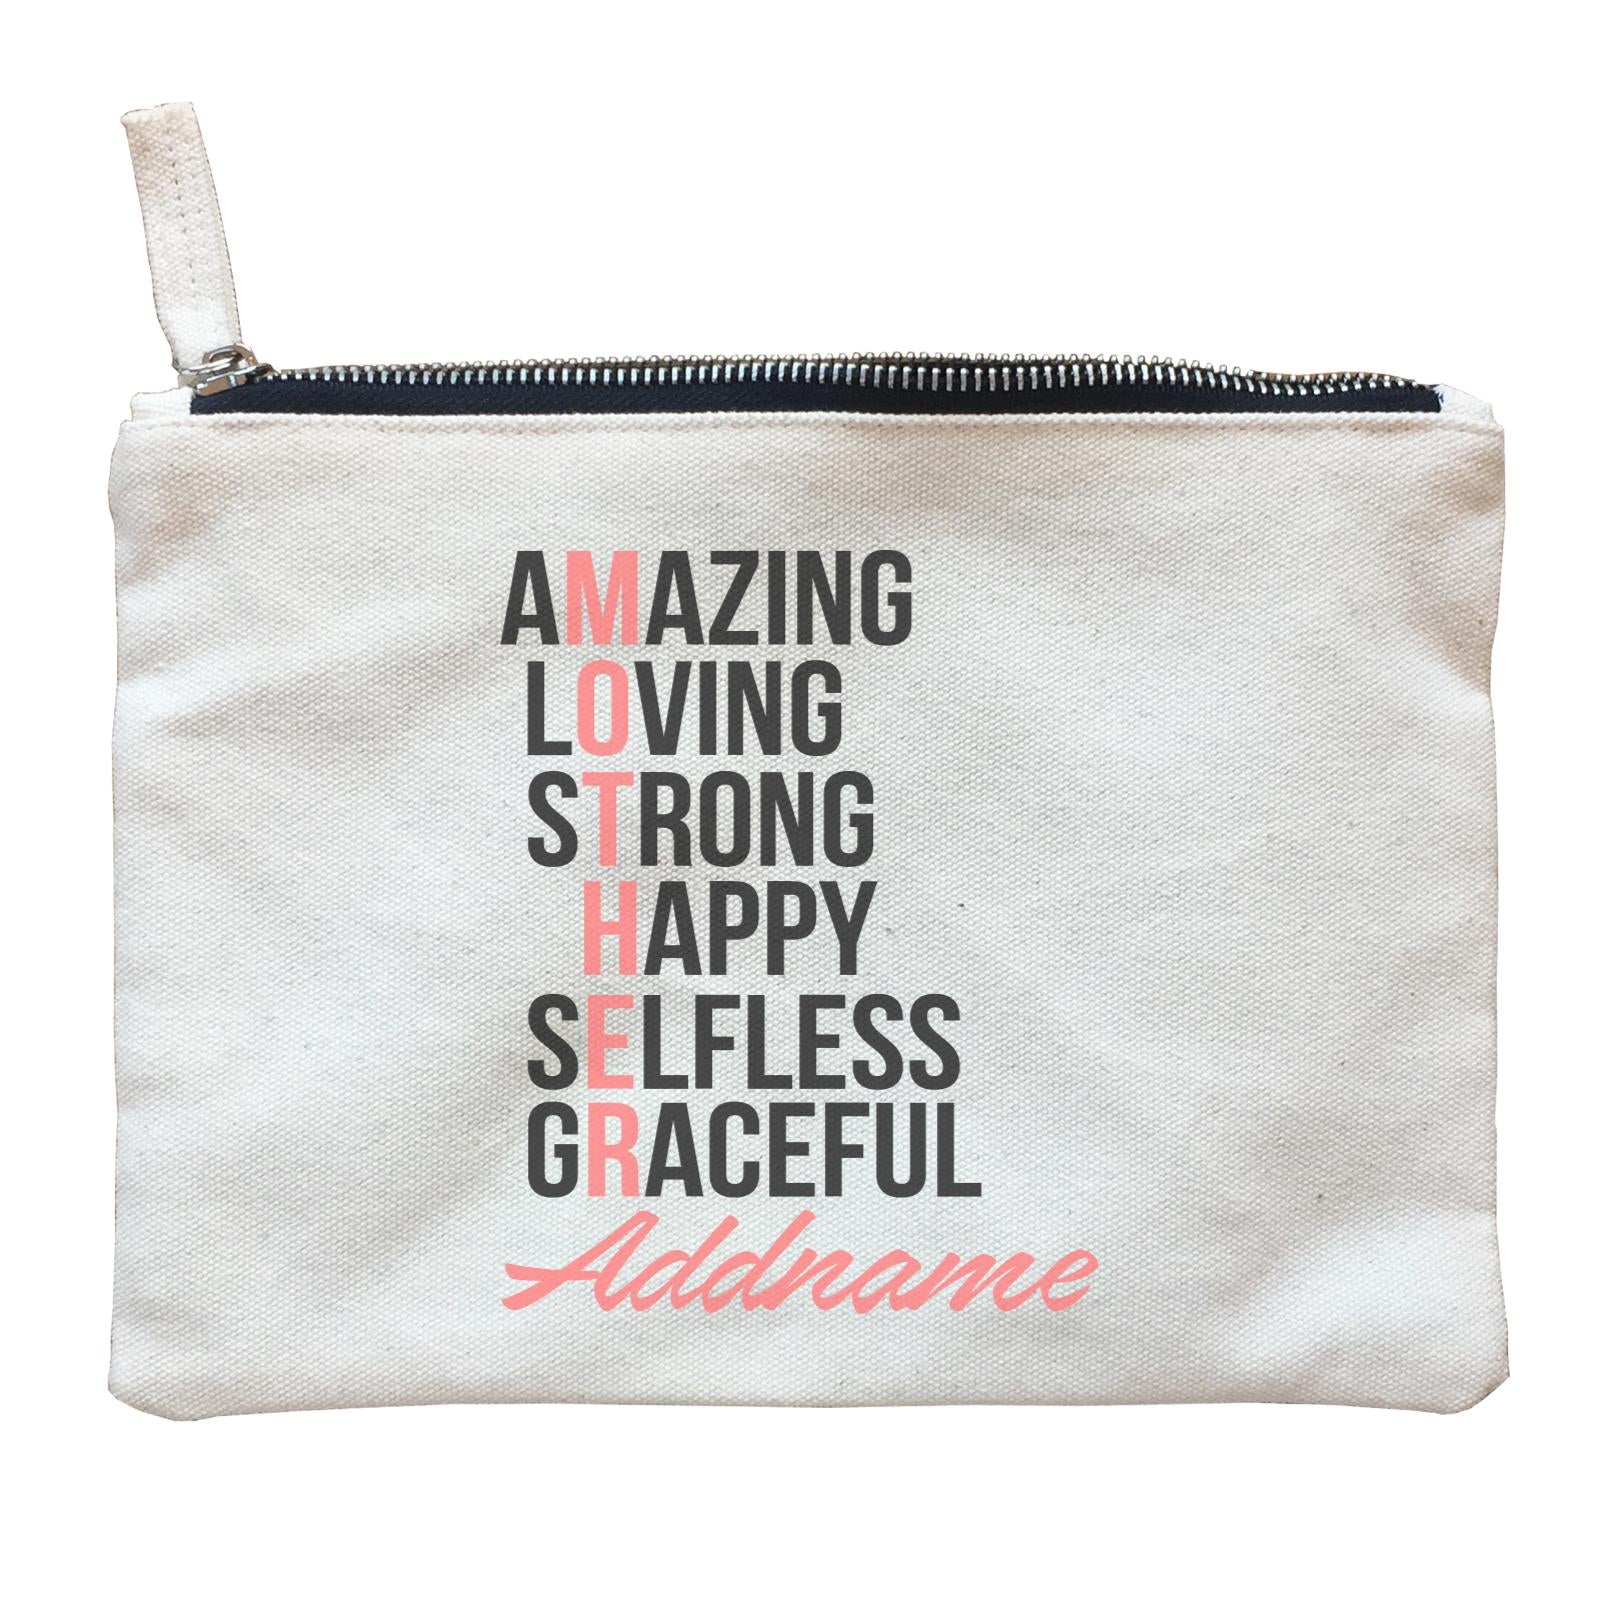 Amazing Loving Strong Happy Selfless Graceful Mother Personalizable with Name Zipper Pouch